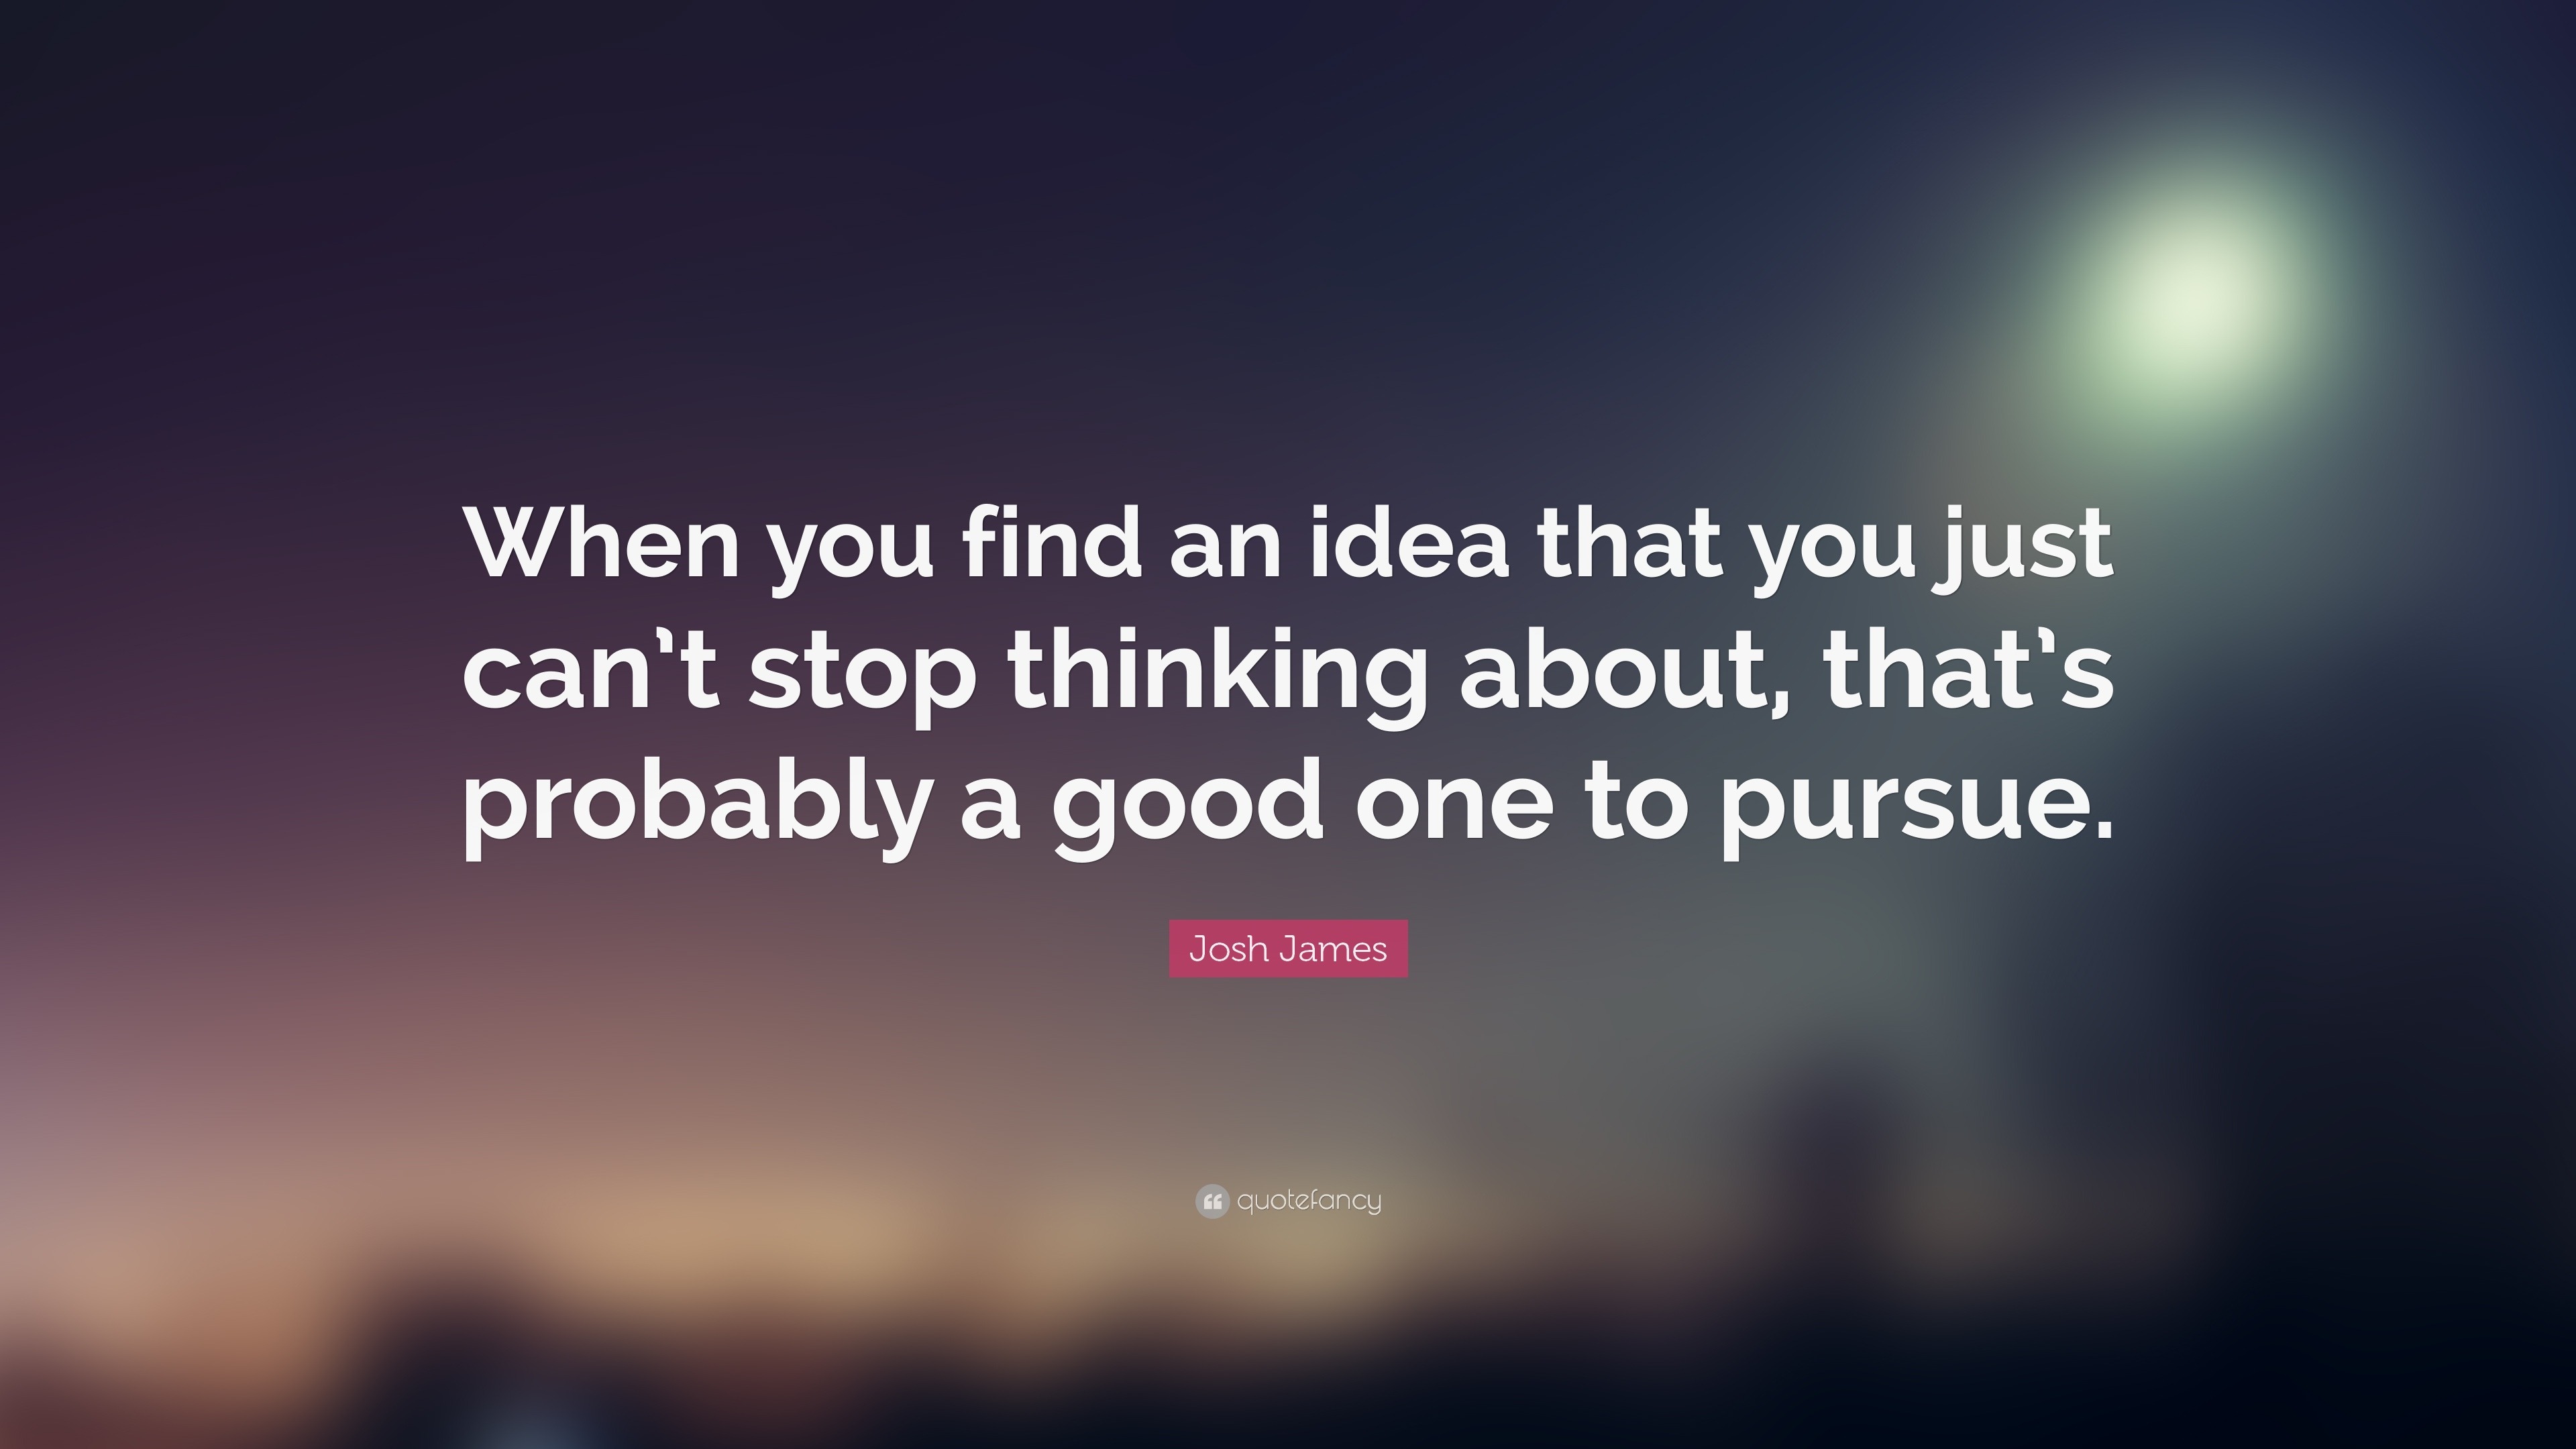 Josh James Quote When You Find An Idea That You Just Can T Stop Thinking About